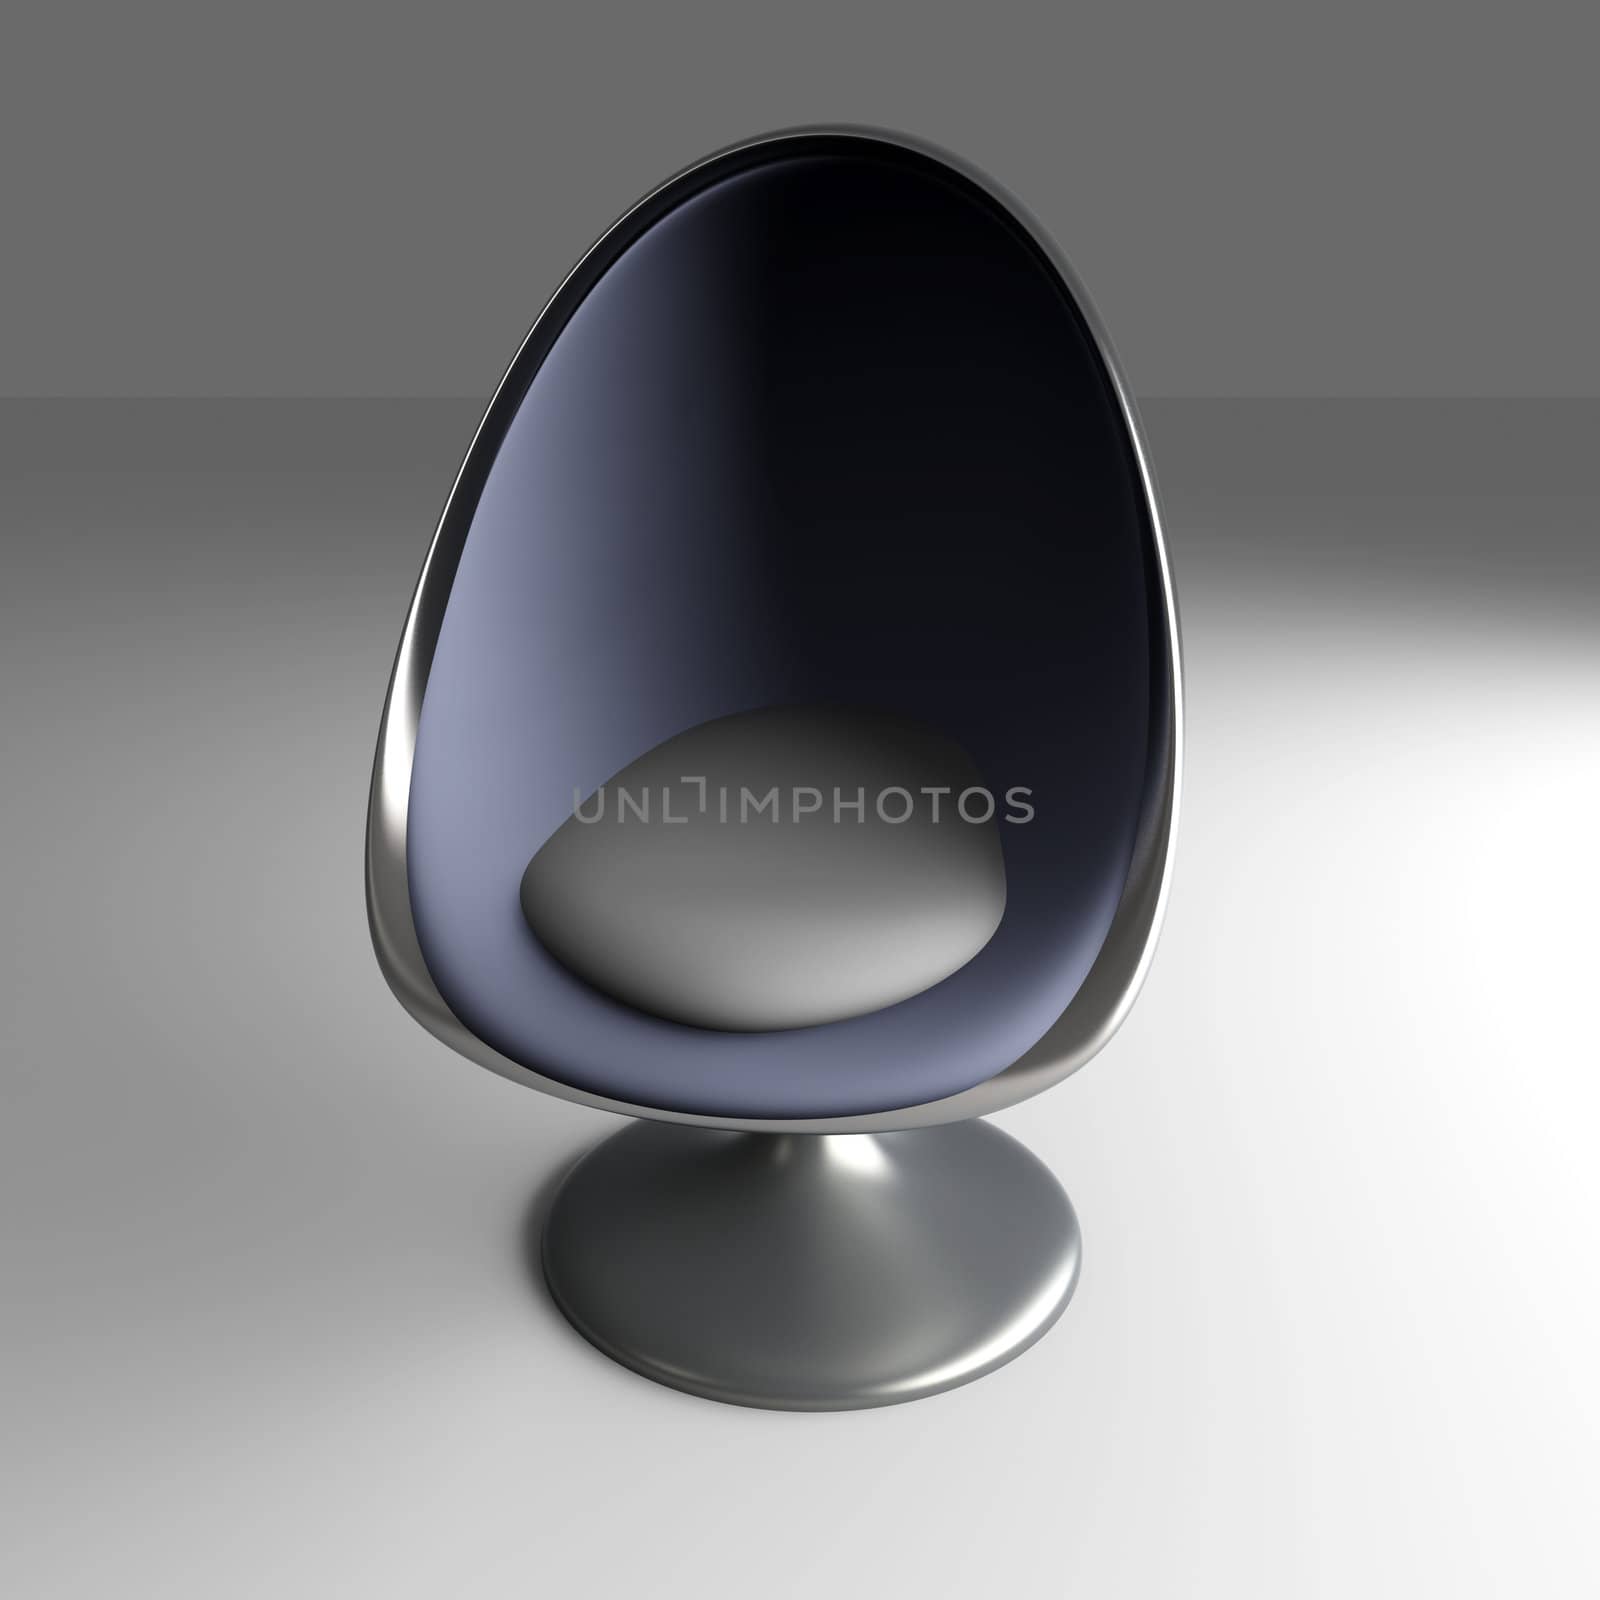 Eggchair by Spectral